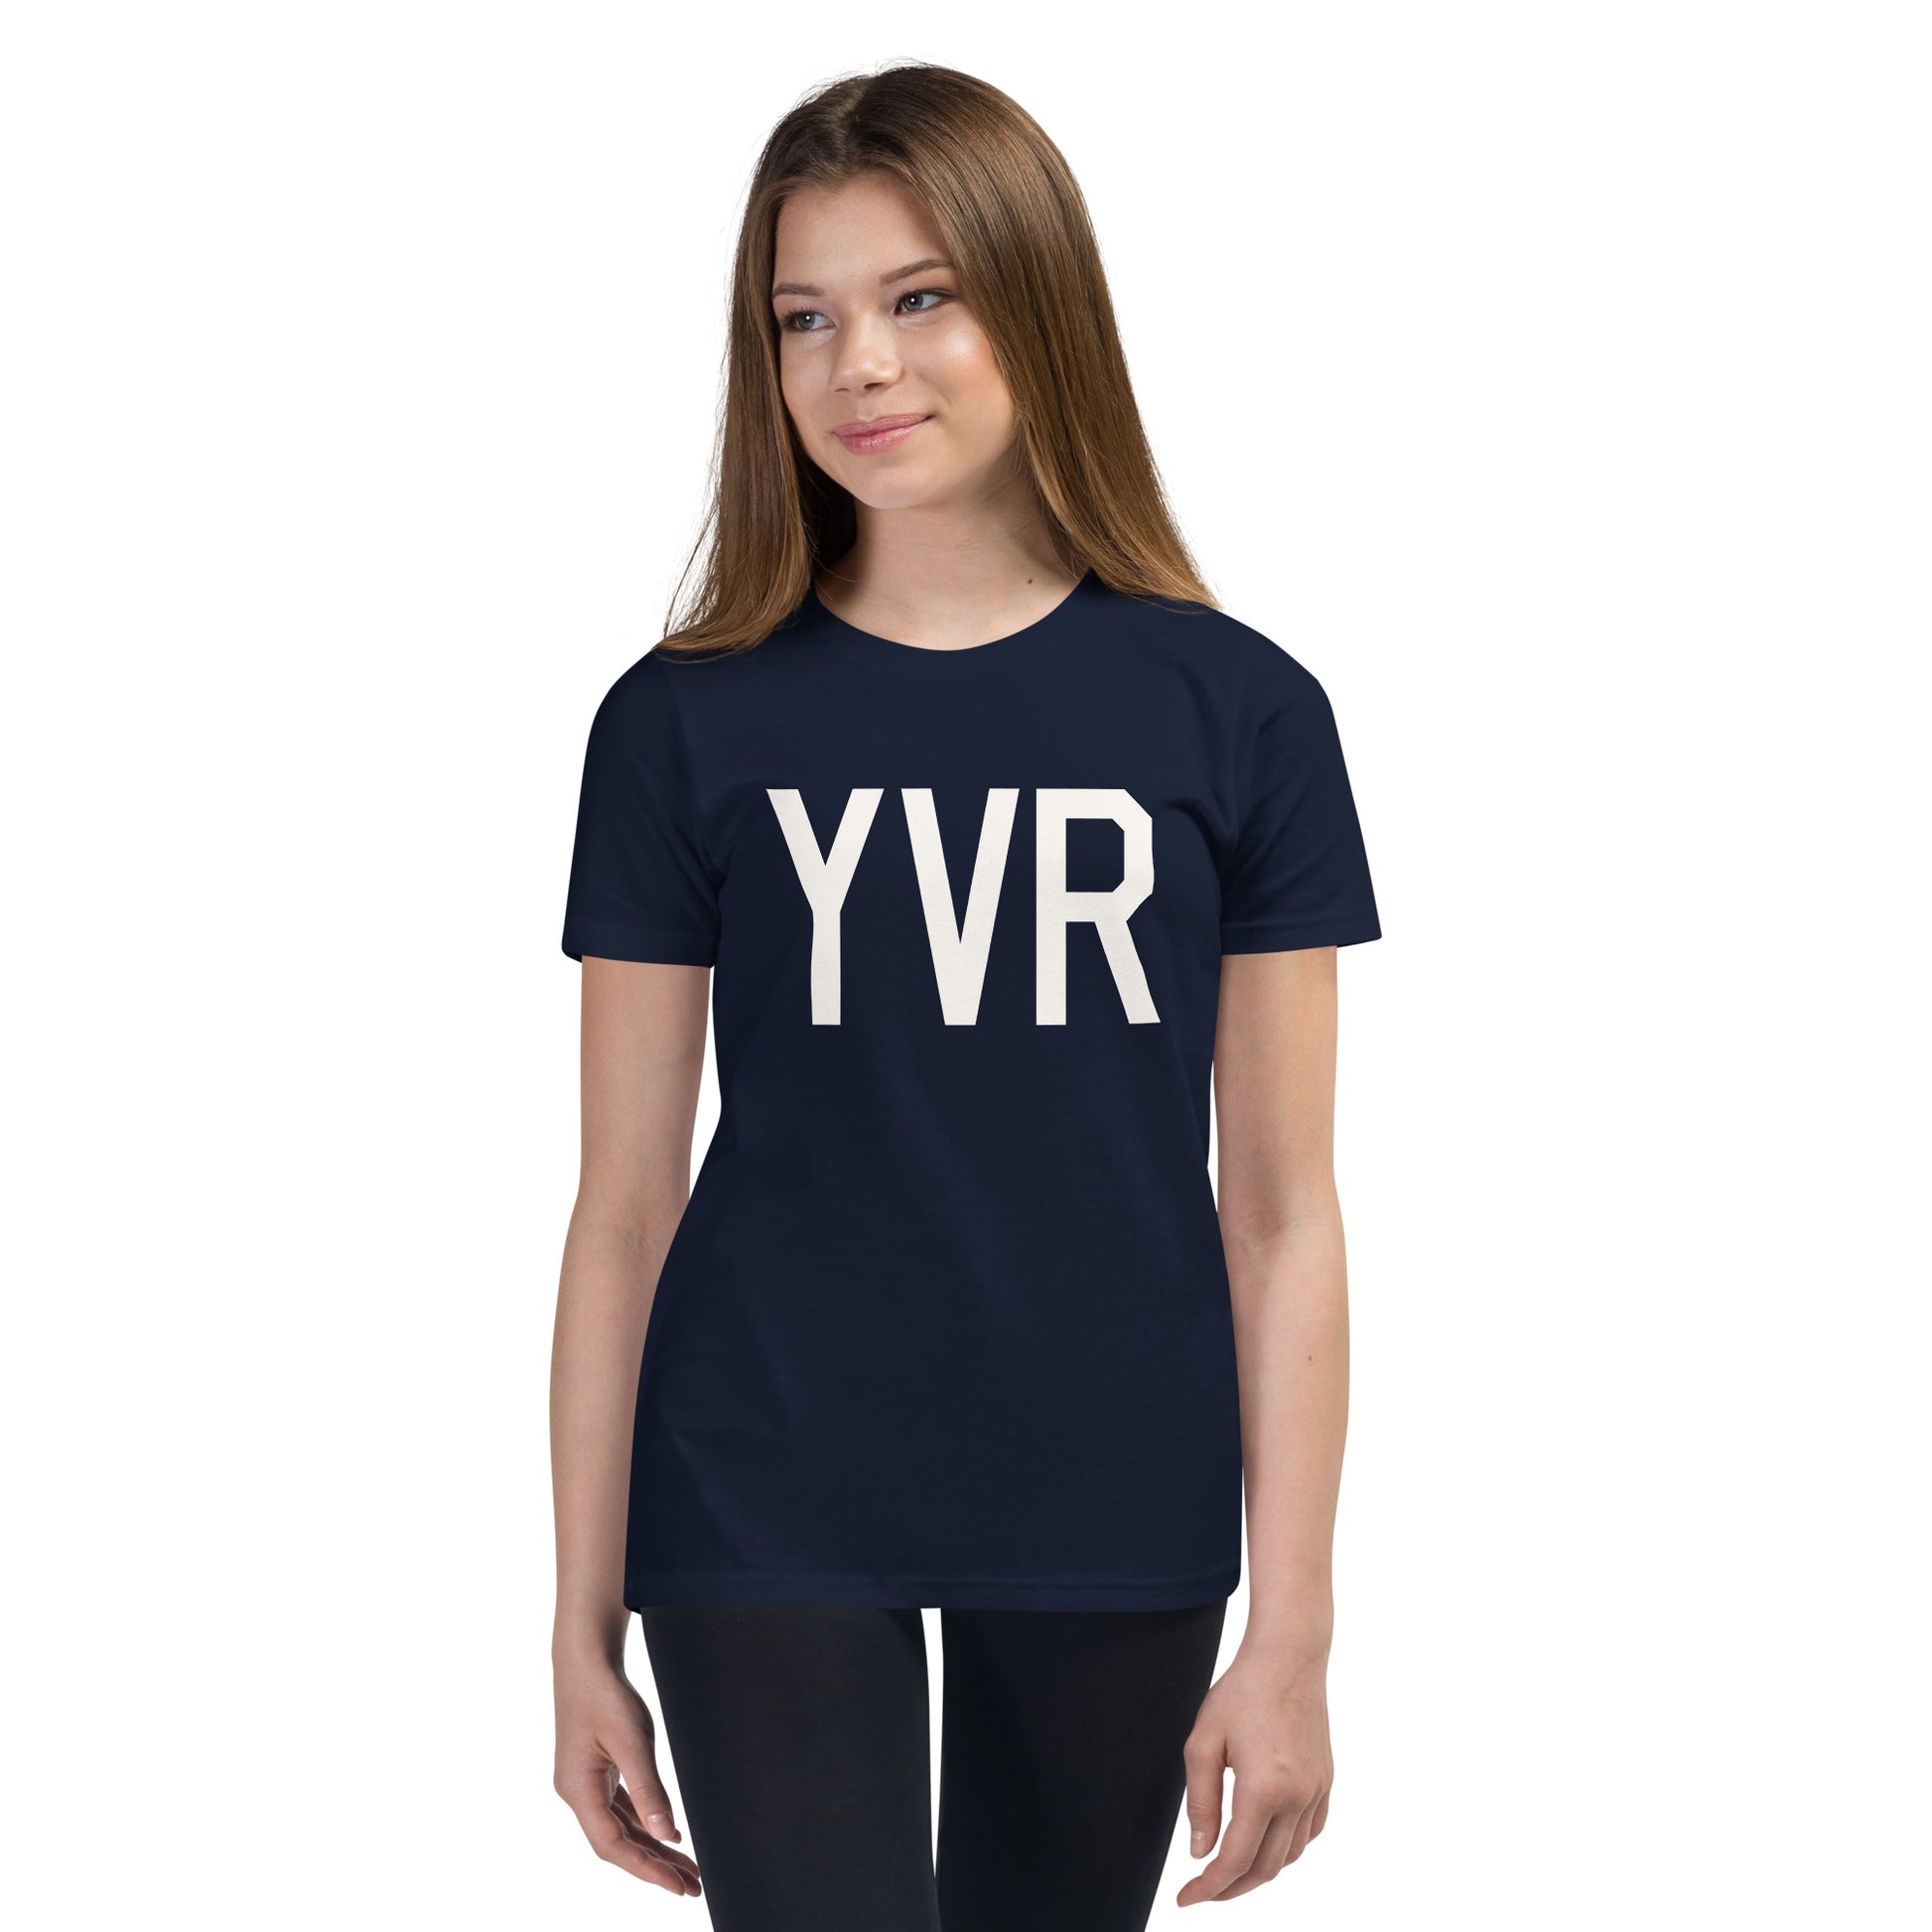 Kid's T-Shirt - White Graphic • YVR Vancouver • YHM Designs - Image 04